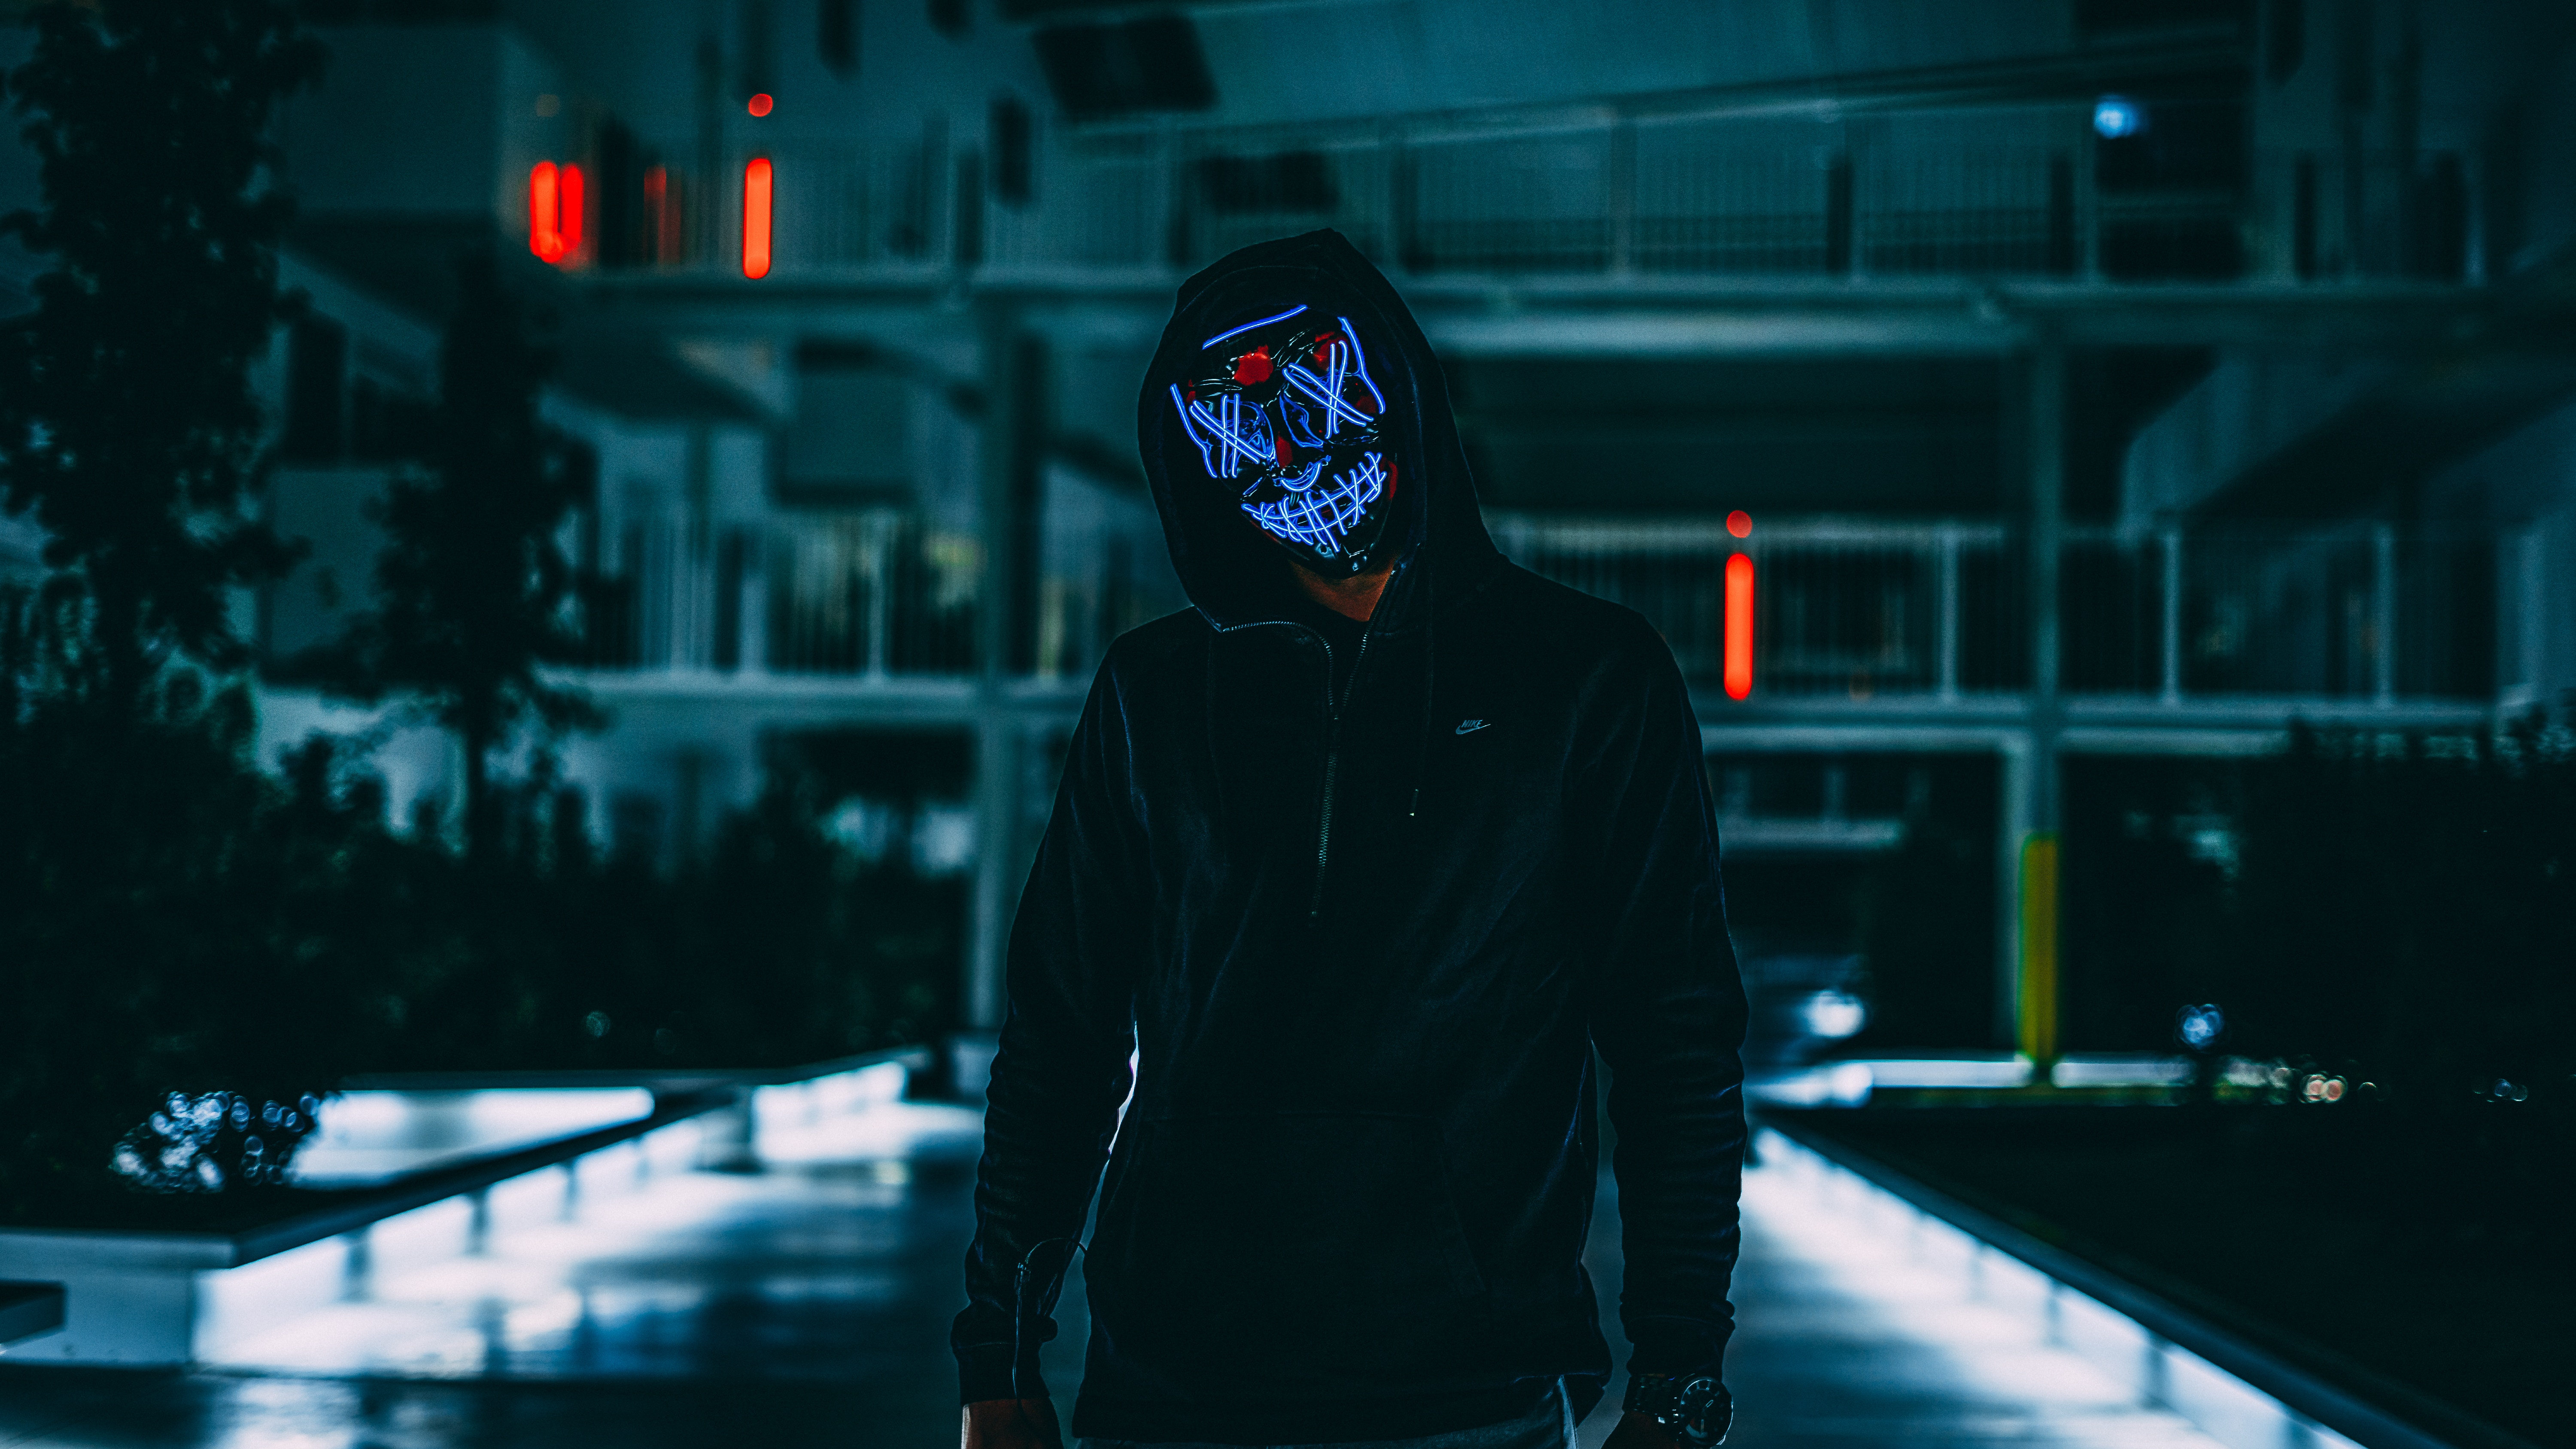 X mask anonymous hood k laptop full hd p hd k wallpapers images backgrounds photos and pictures